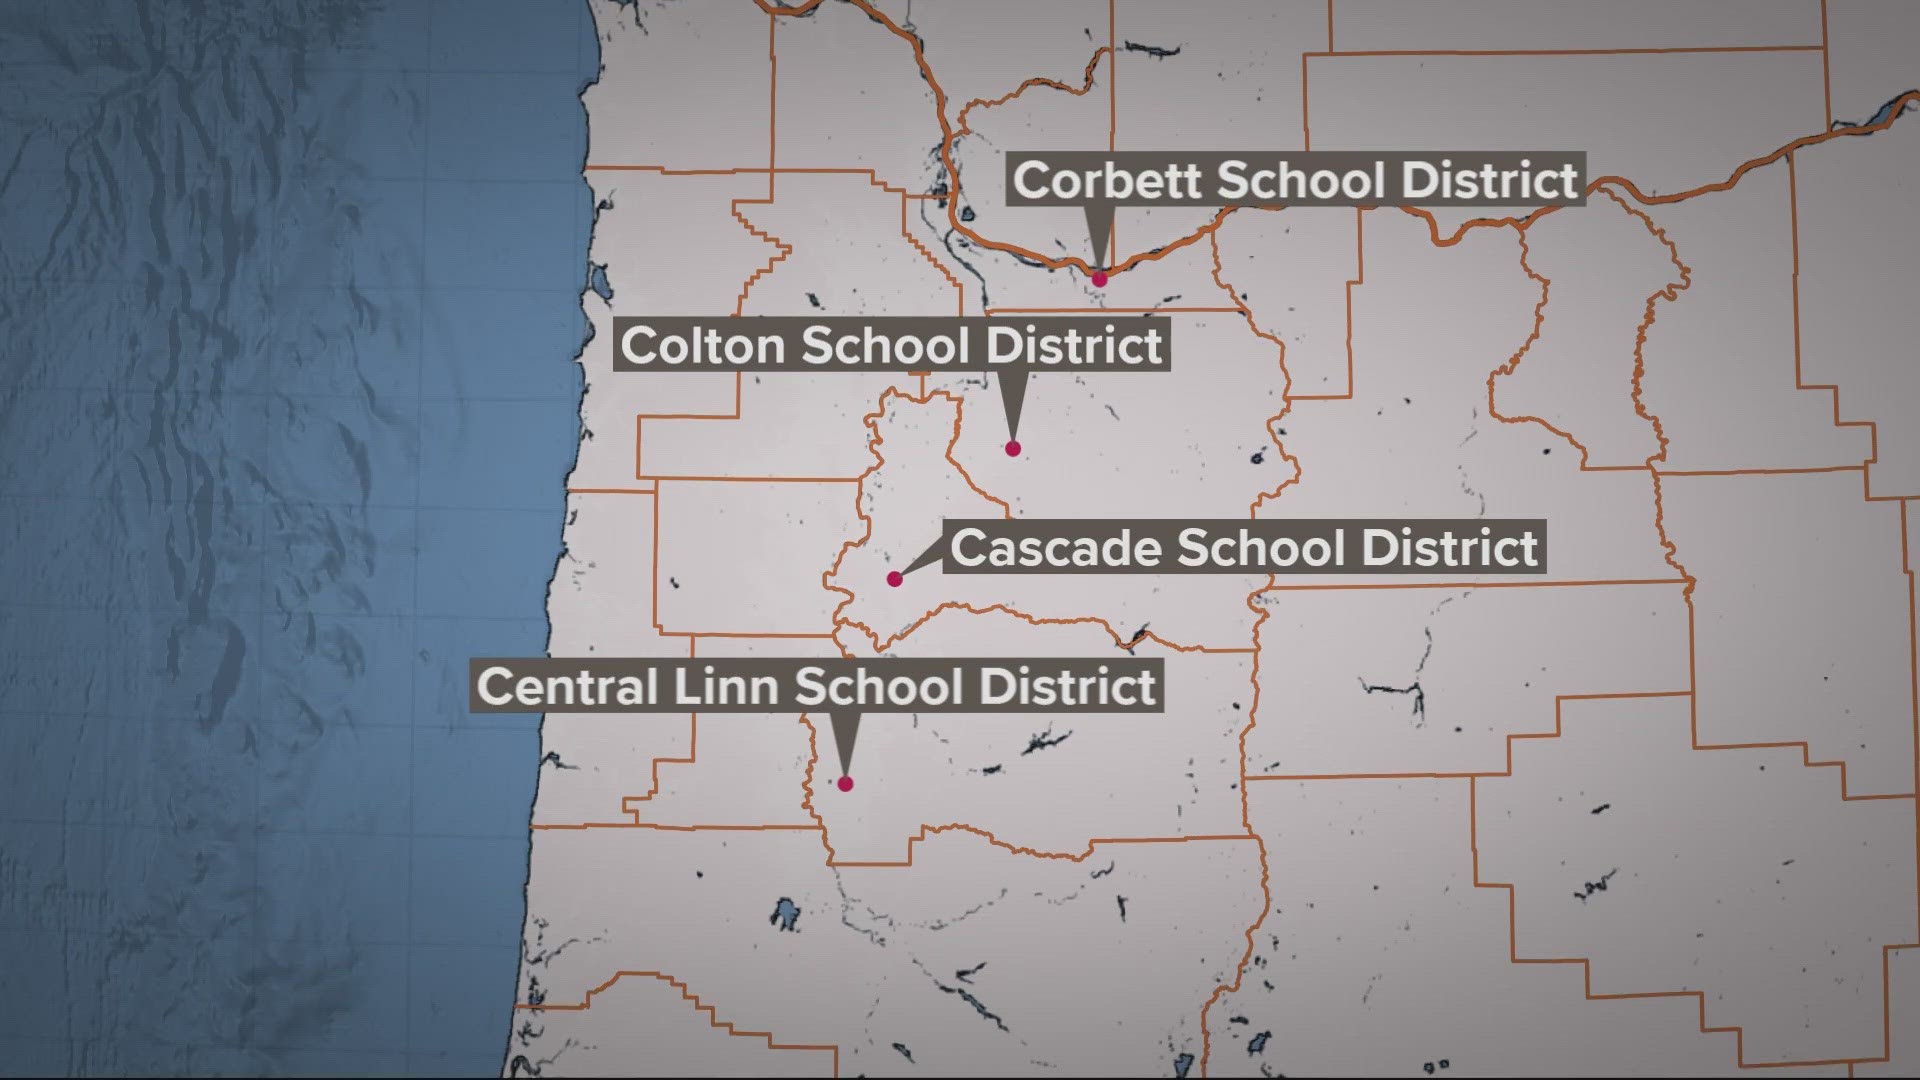 Some school districts received threats about a bomb or explosive on Monday. Law enforcement responded to the schools have said no devices have been found.